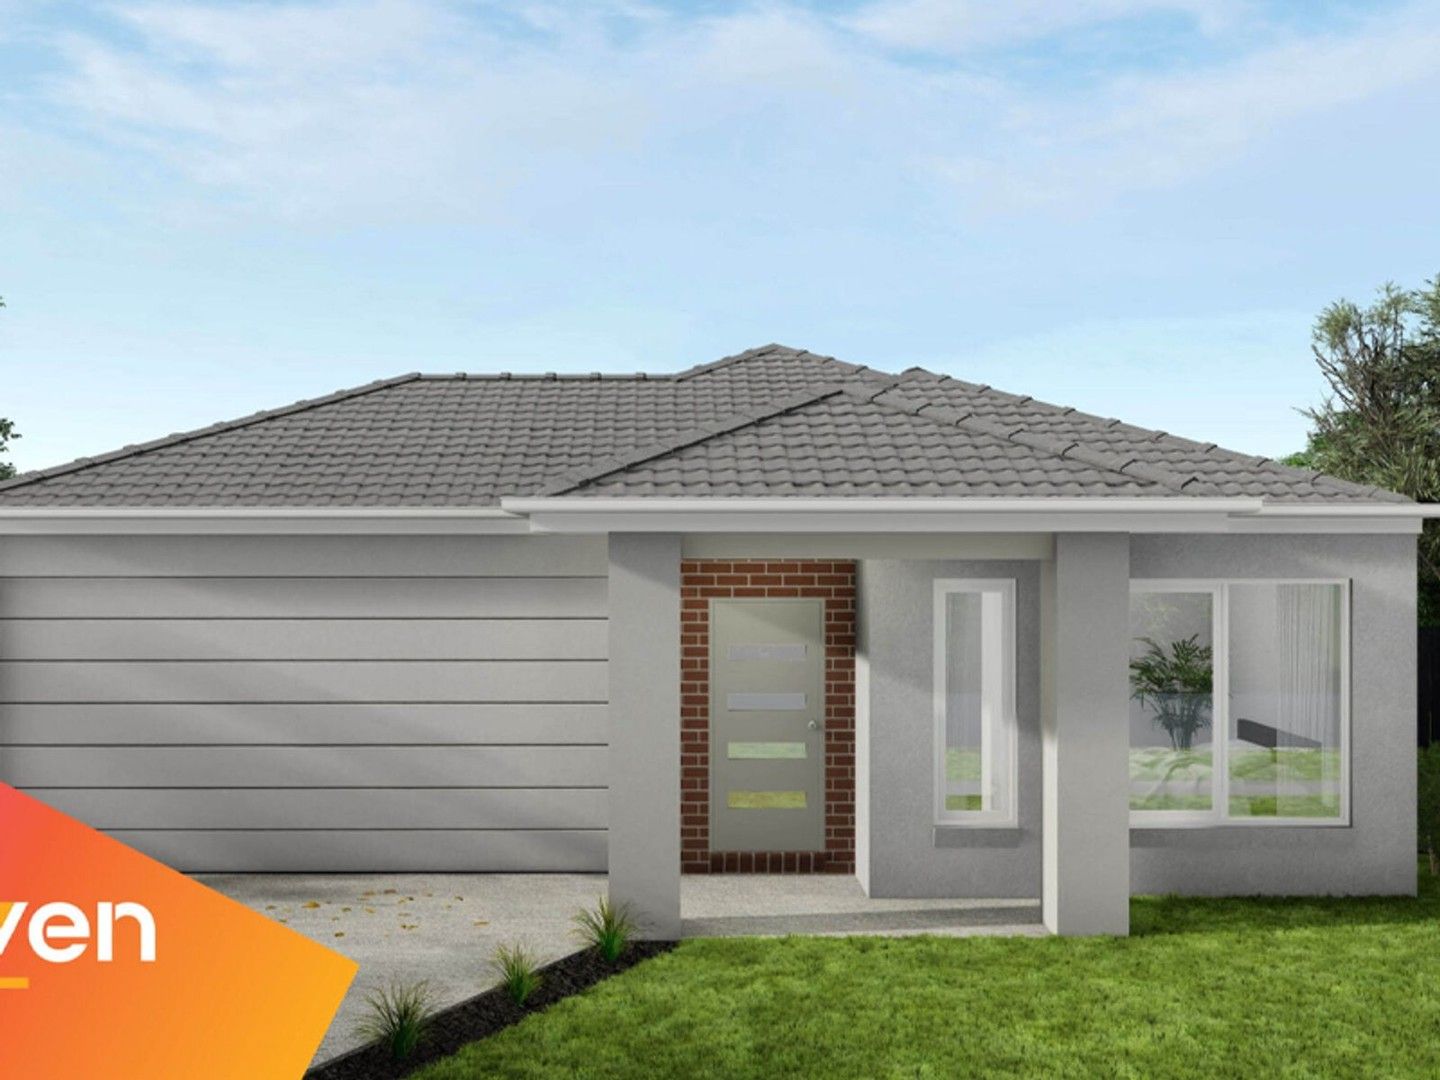 3 bedrooms New House & Land in 222666/2226 Hardys Road CLYDE NORTH VIC, 3978